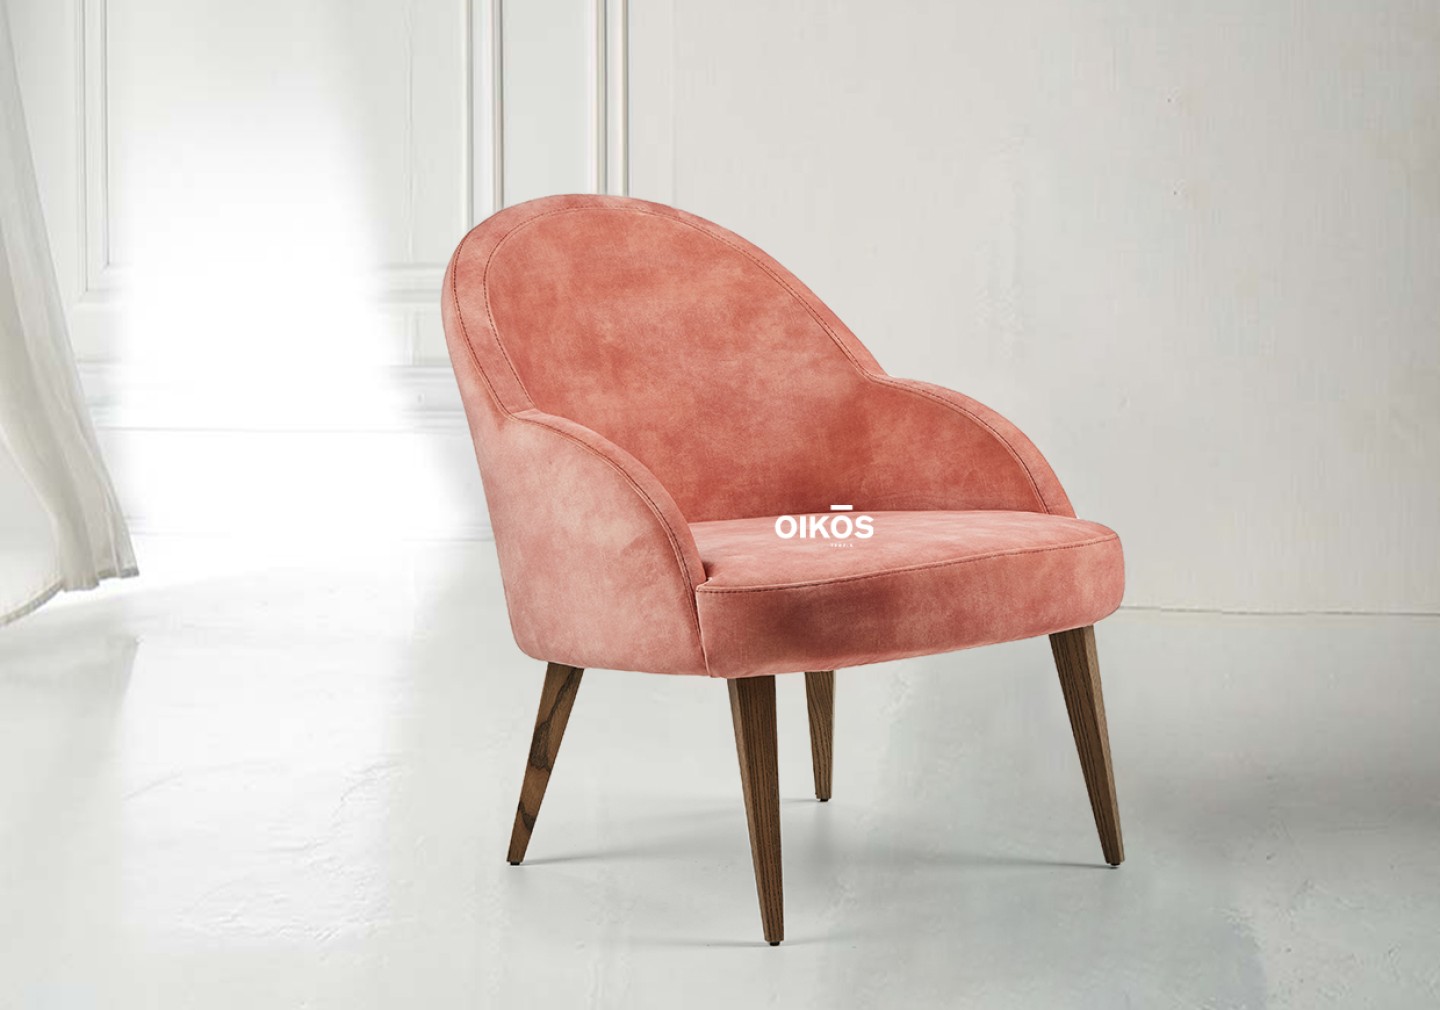 THE THERESSE ARMCHAIR